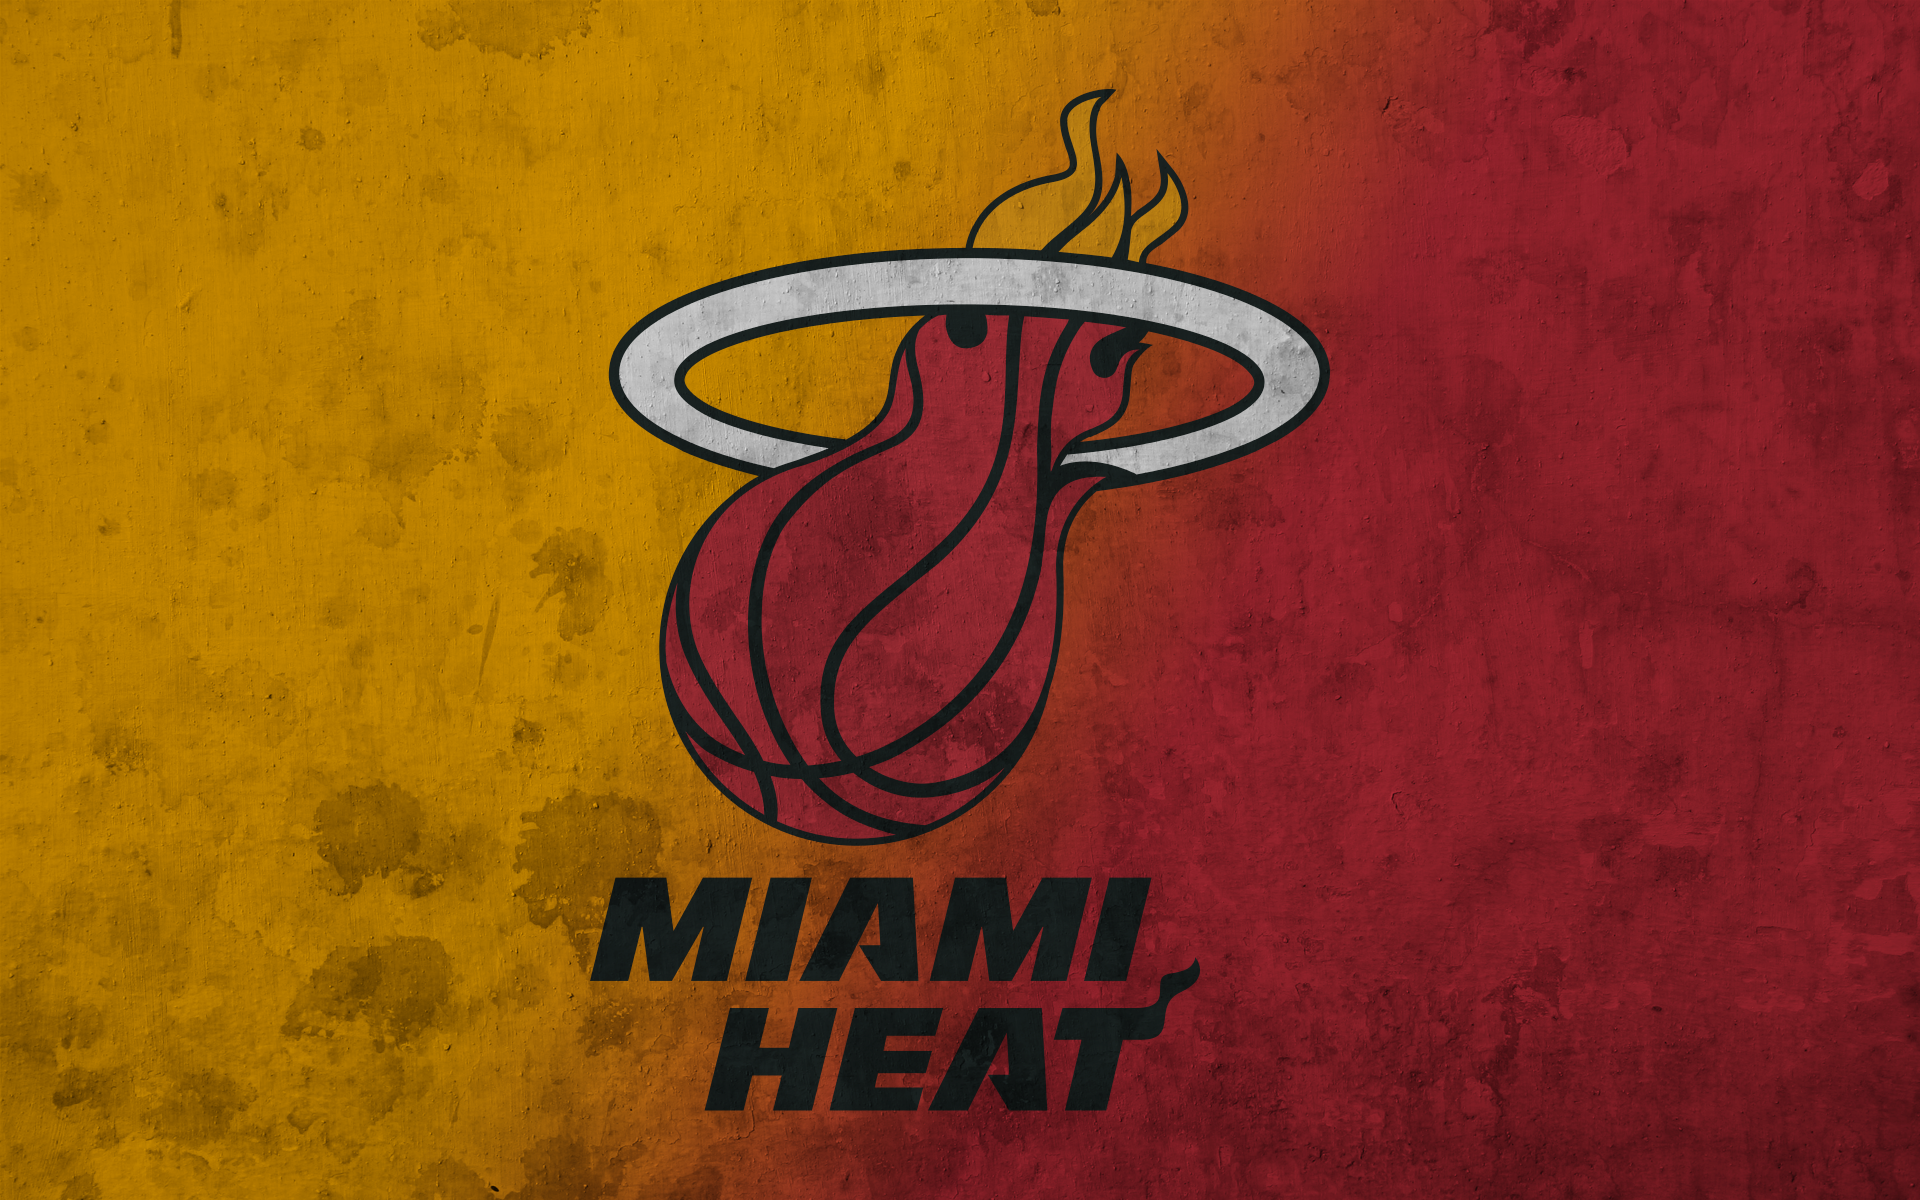 Very Early NBA 2020-21 Season Predictions: Can Miami Lure Dragic And Crowder To One-Year Deals?